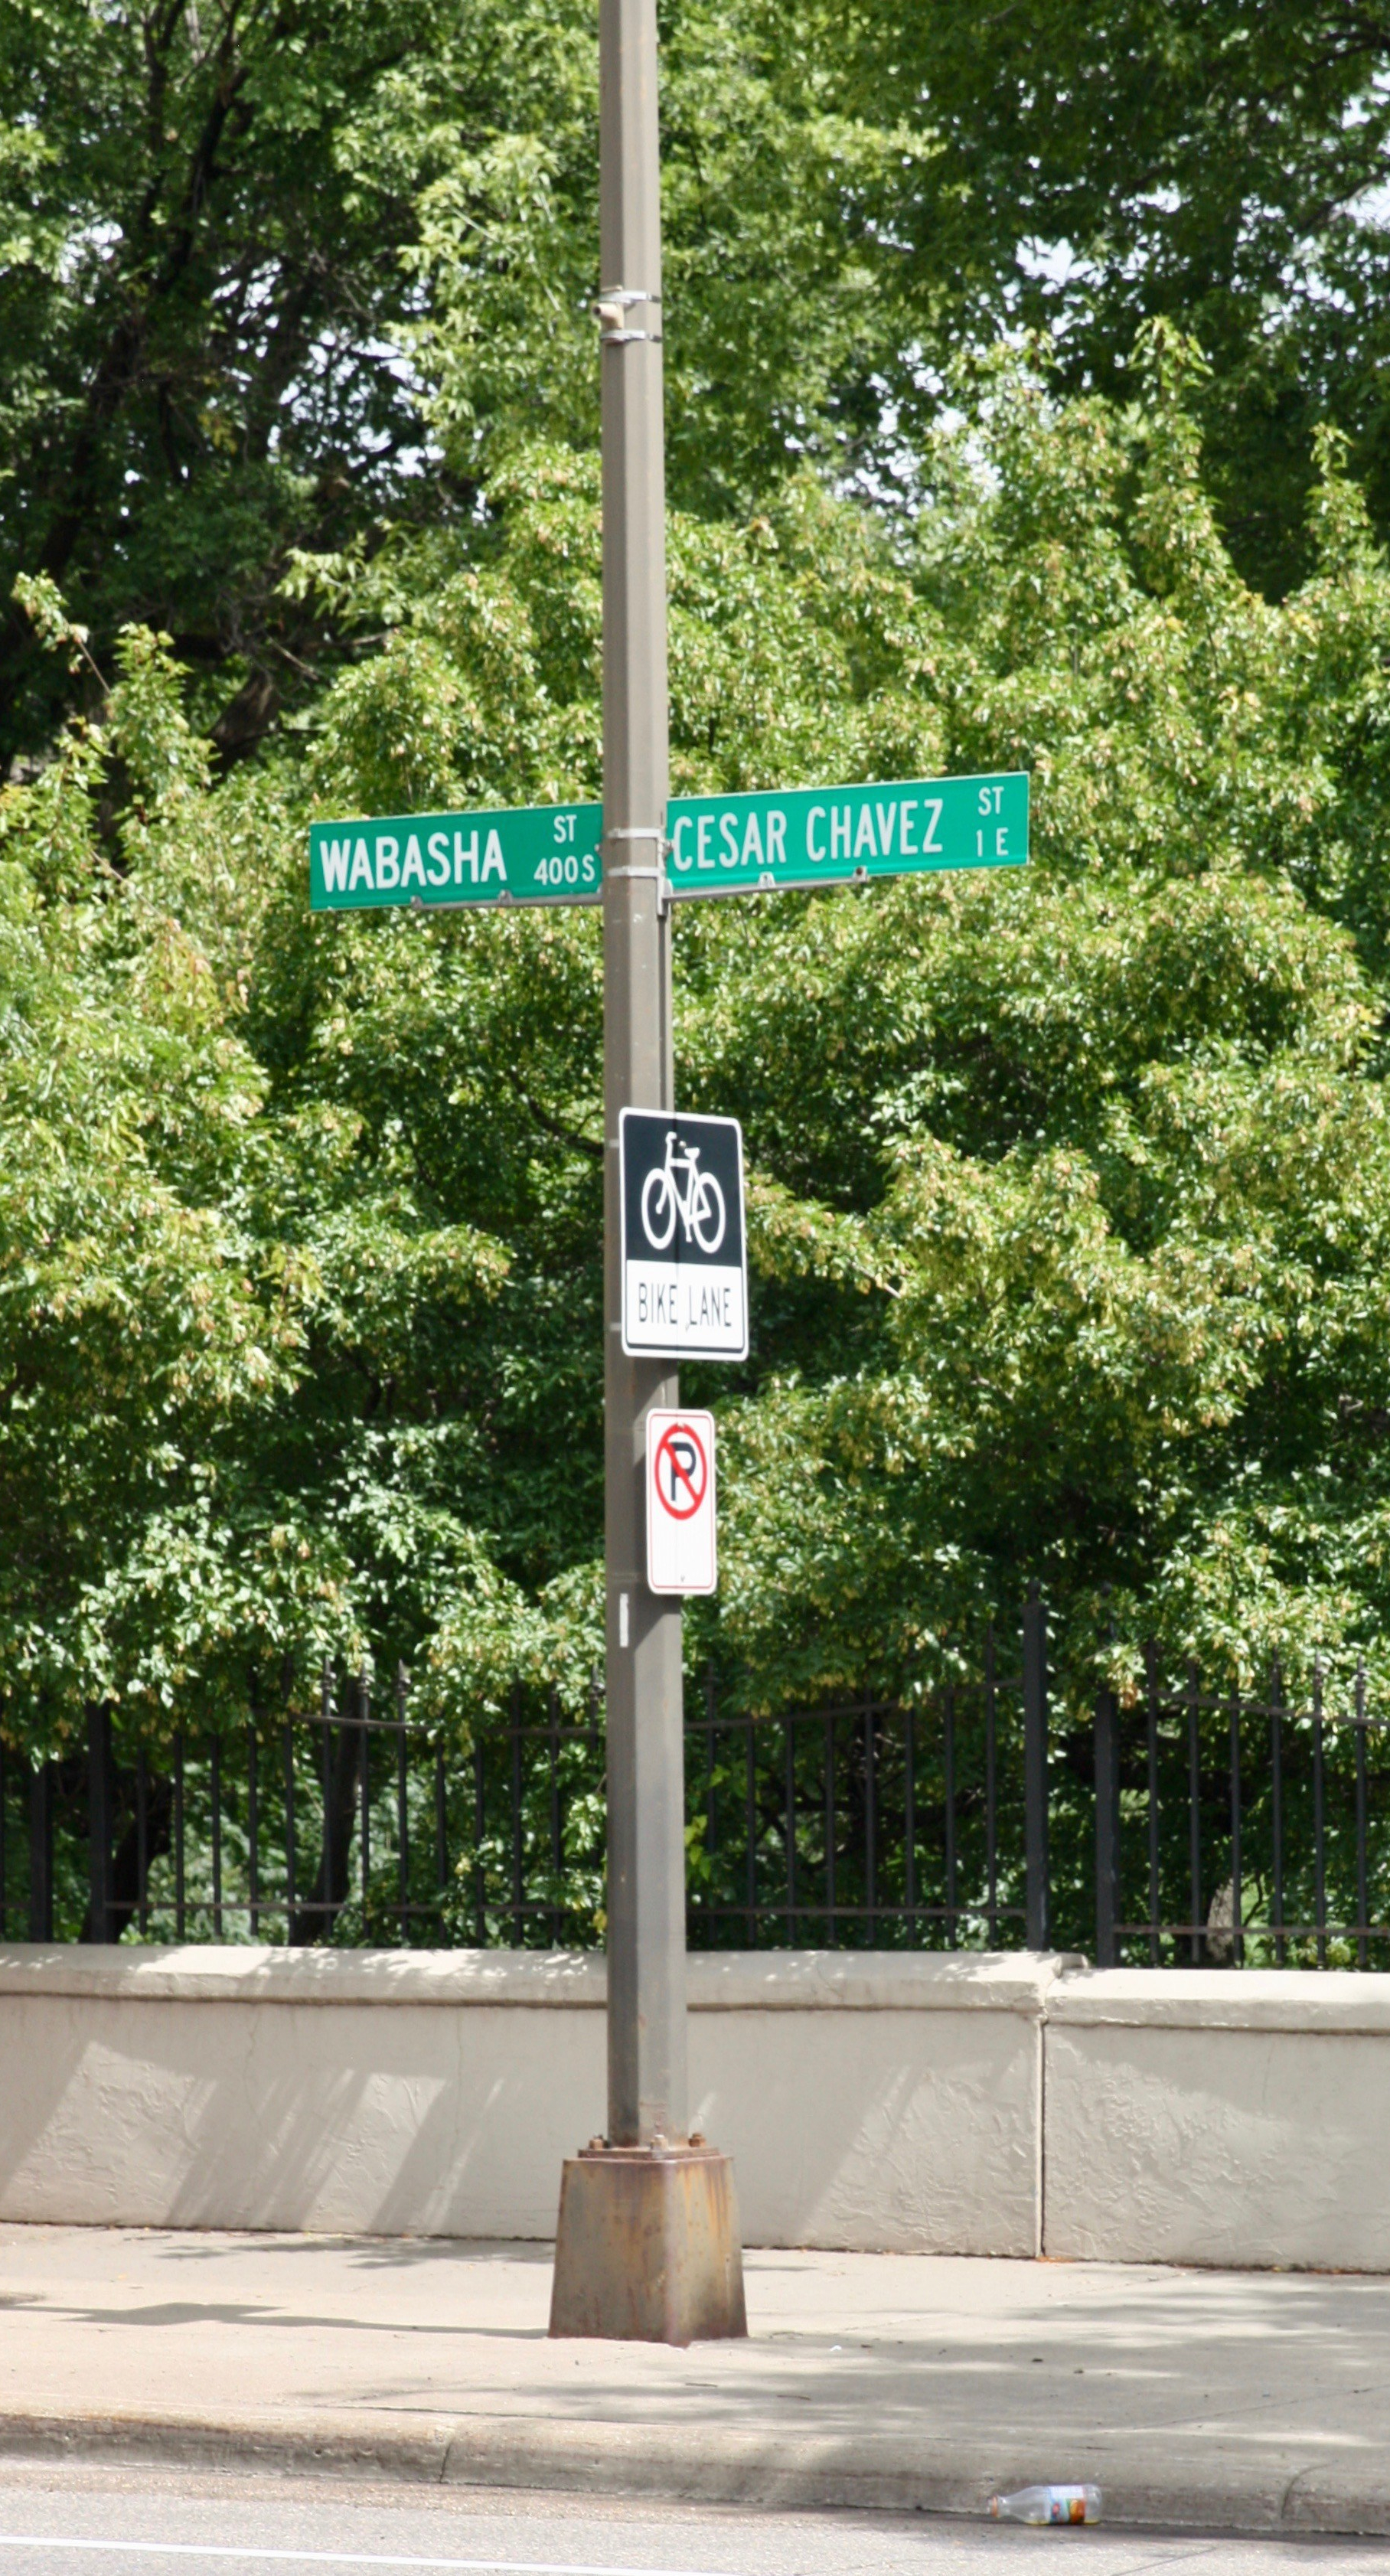 Street signs pointing out the change from Wabasha to Cesar Chavez Street.)